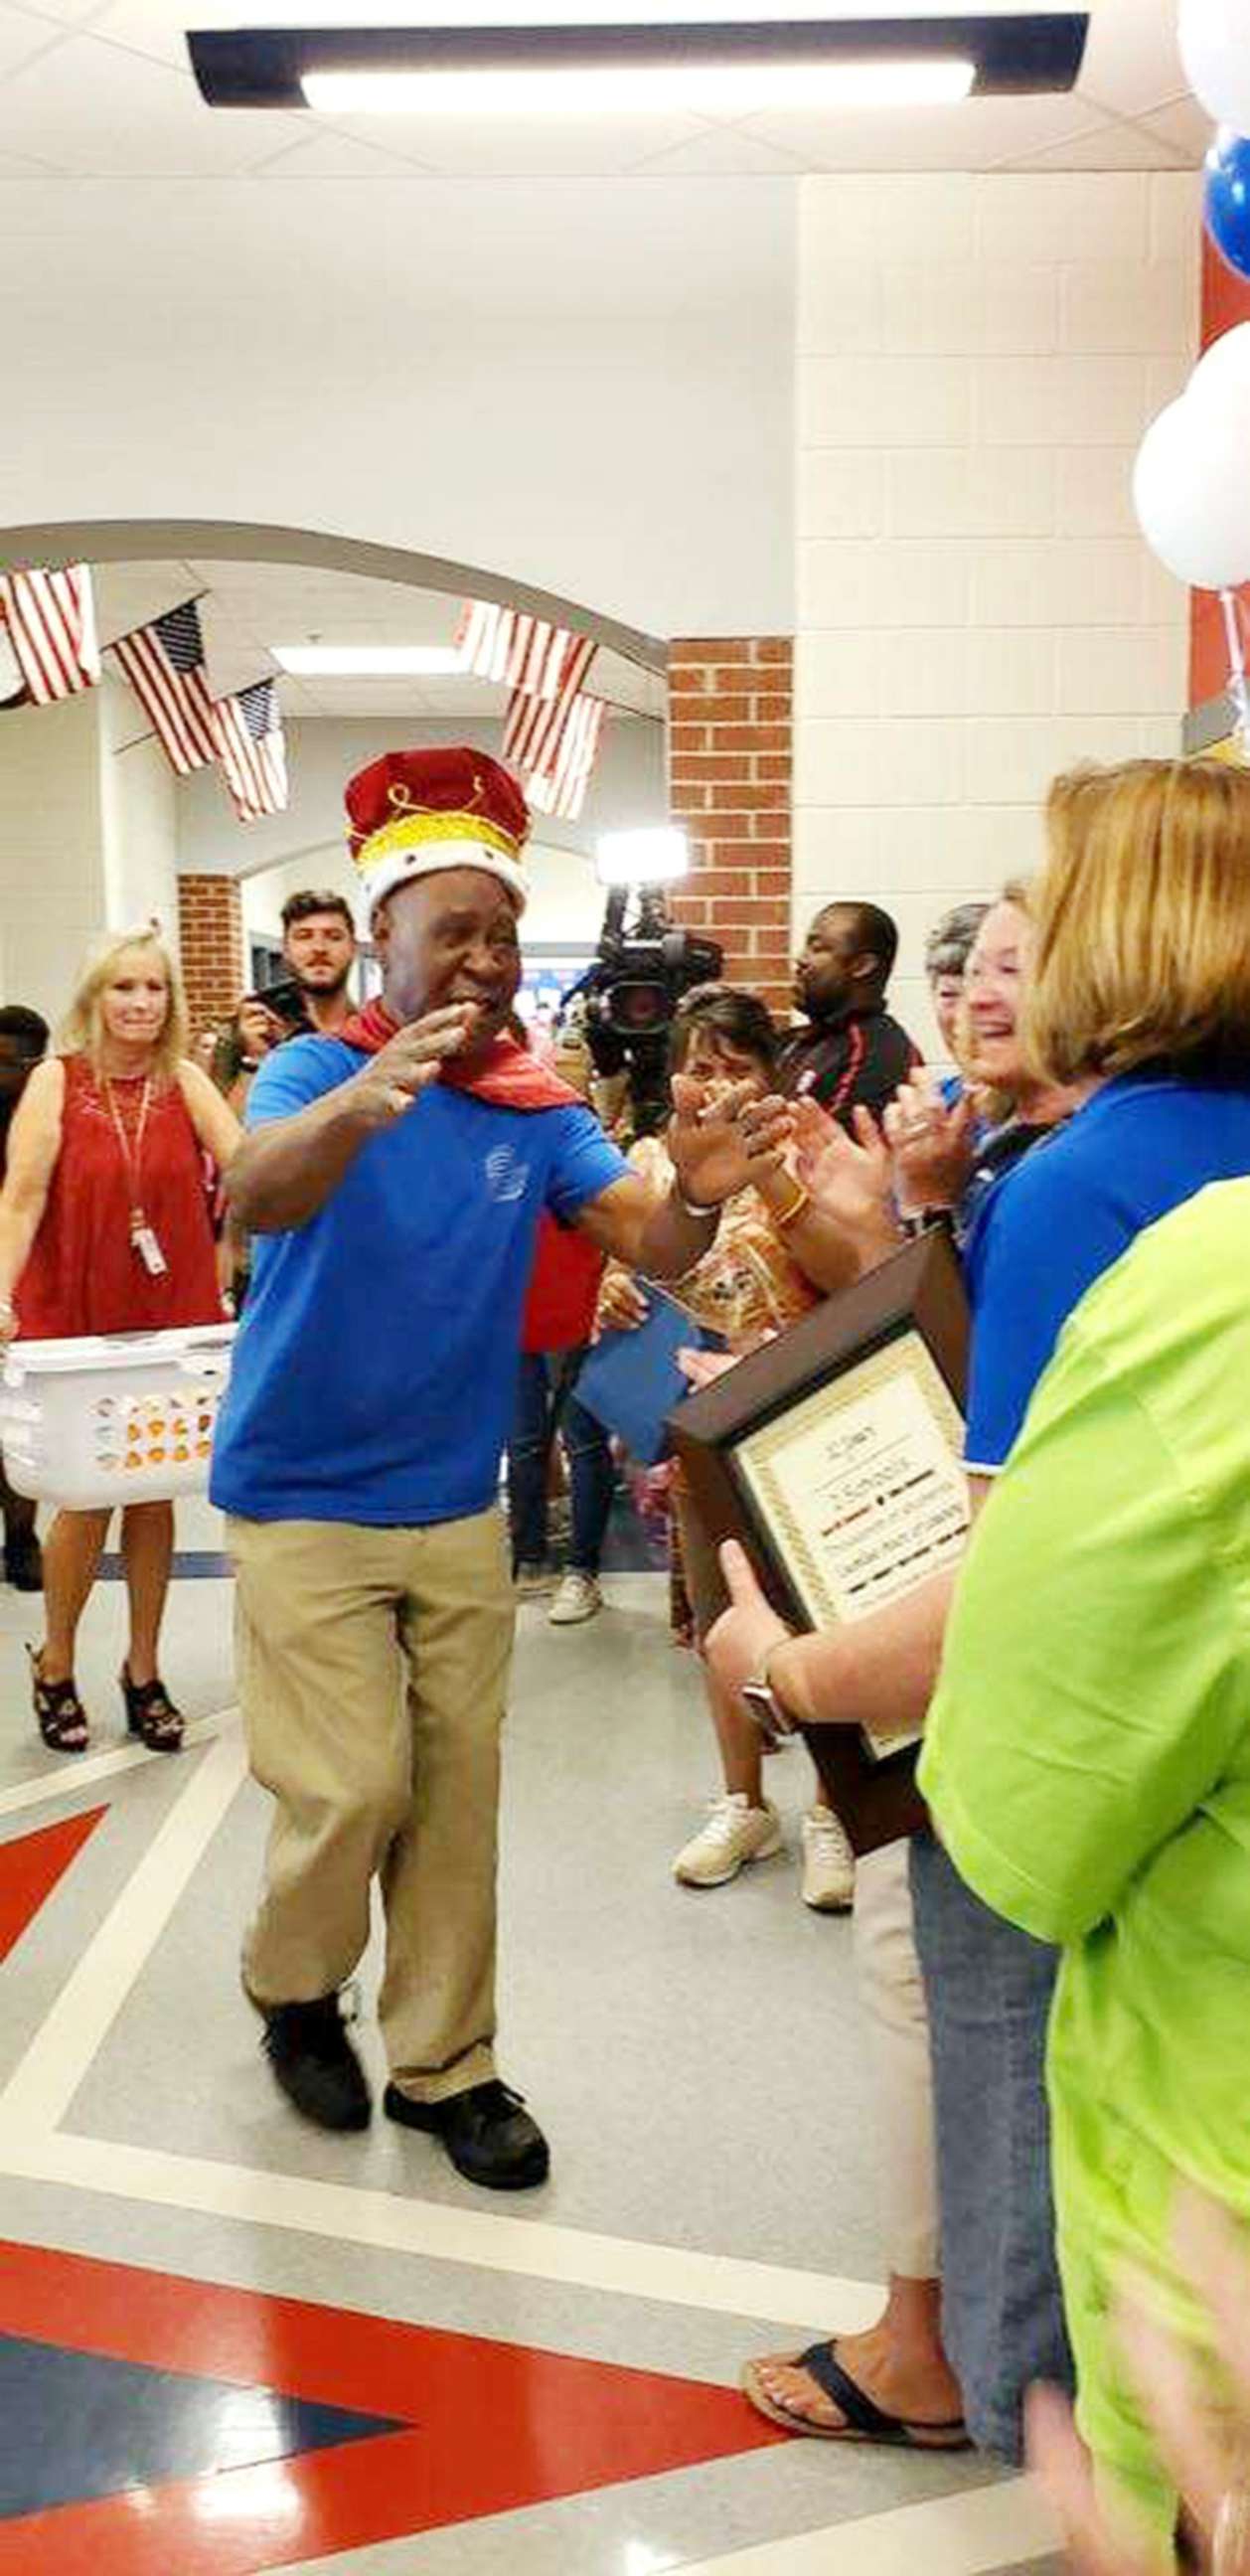 PHOTO: John Lockett, 83, a janitor at Sand Hill Elementary School in Carrollton, GA, received a surprise retirement party from students on May 17, 2019.